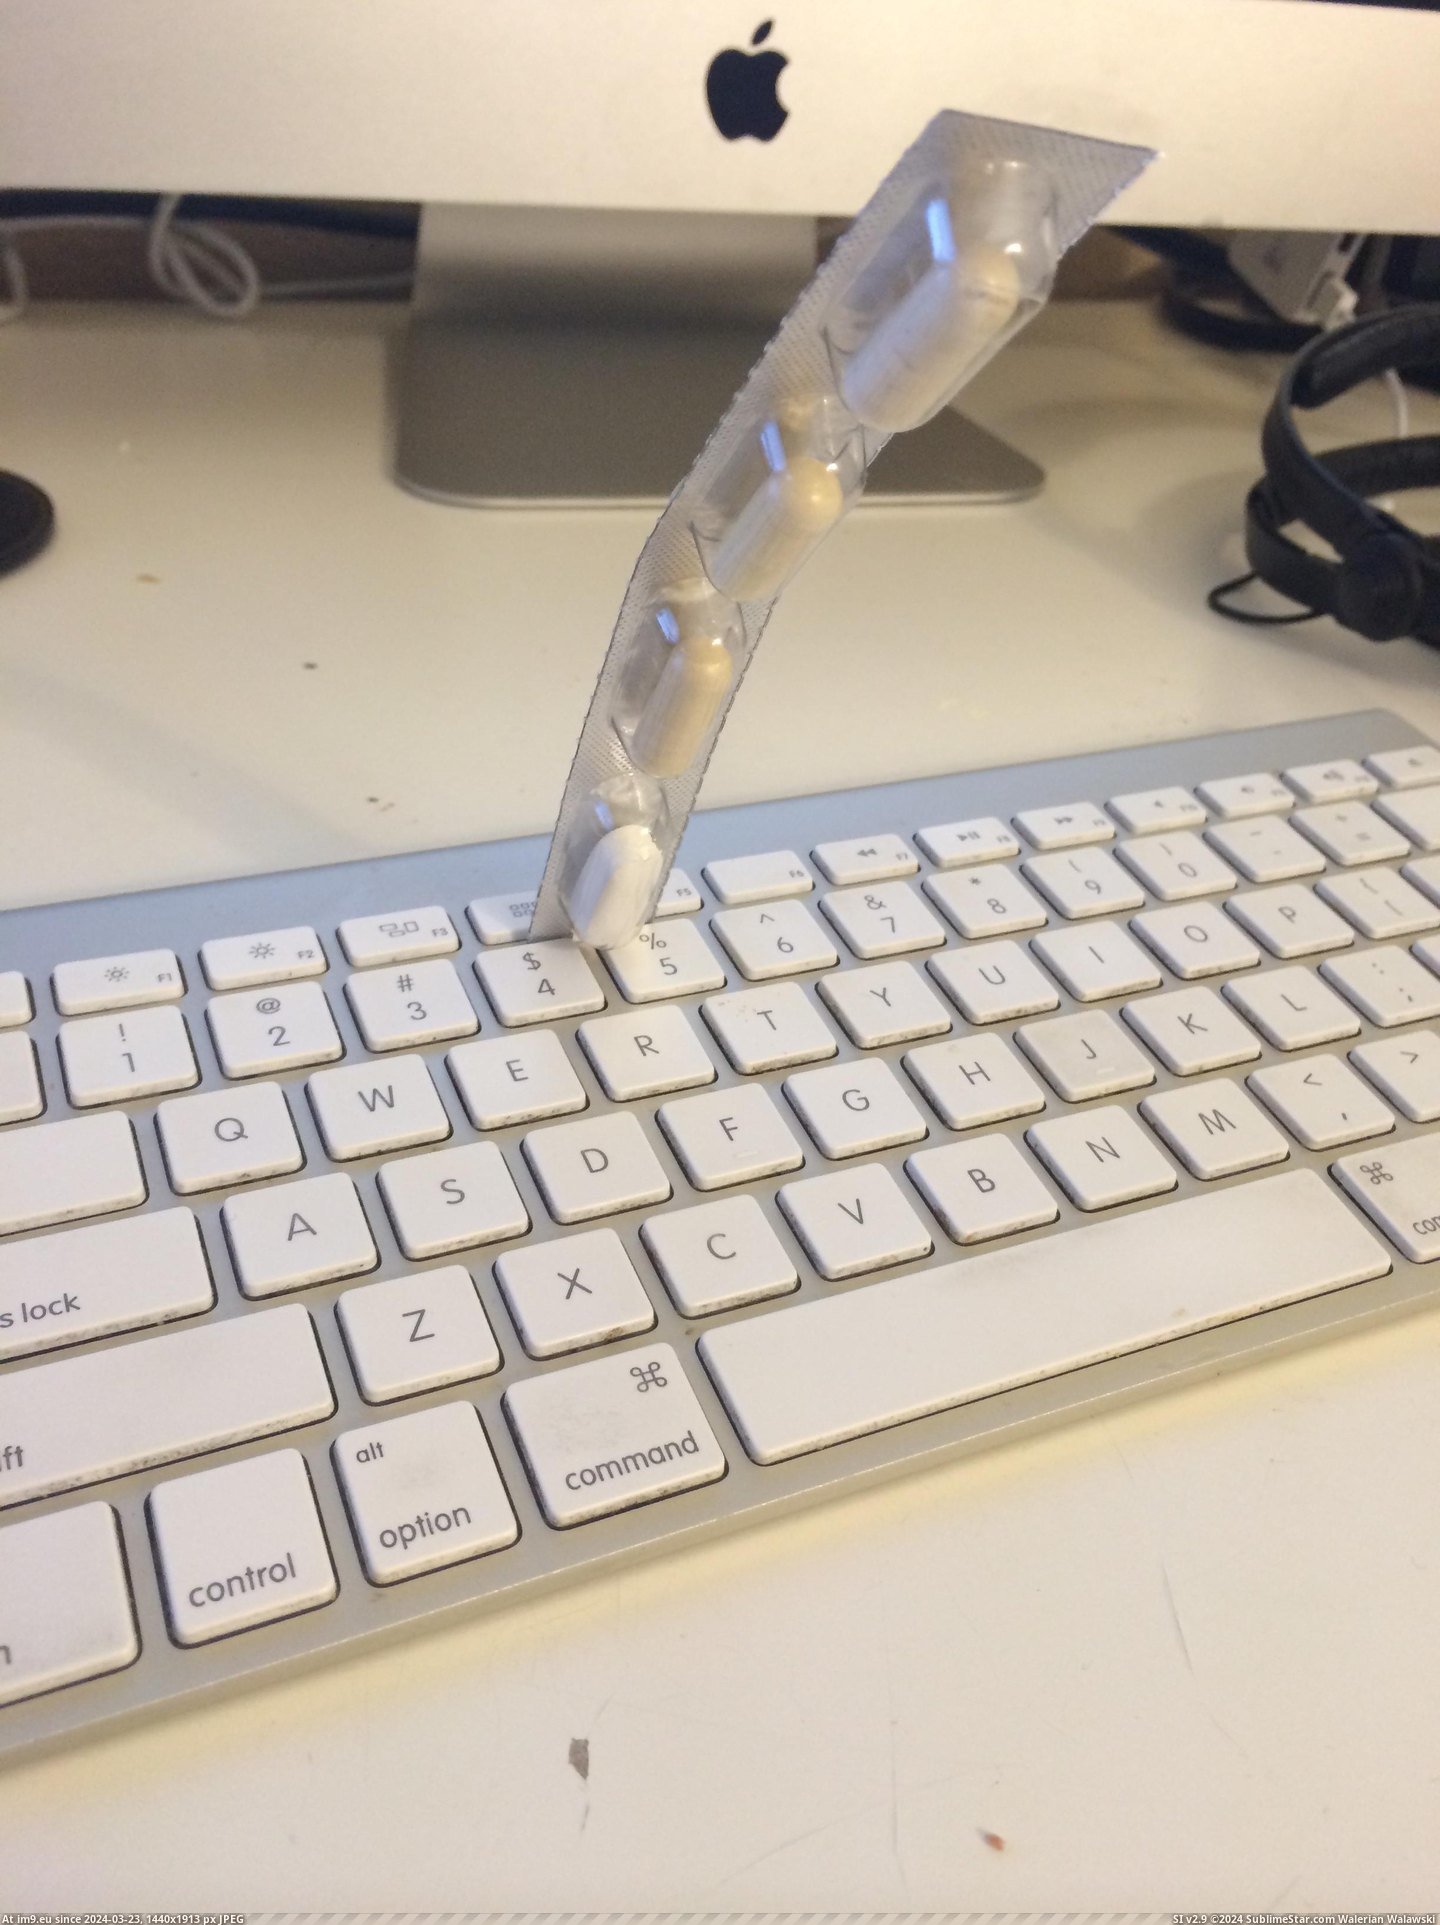 #Room #Strip #Tossed #Pills #Desk #Landed [Mildlyinteresting] Tossed a strip of pills at my desk from across the room and they landed like this. Pic. (Изображение из альбом My r/MILDLYINTERESTING favs))